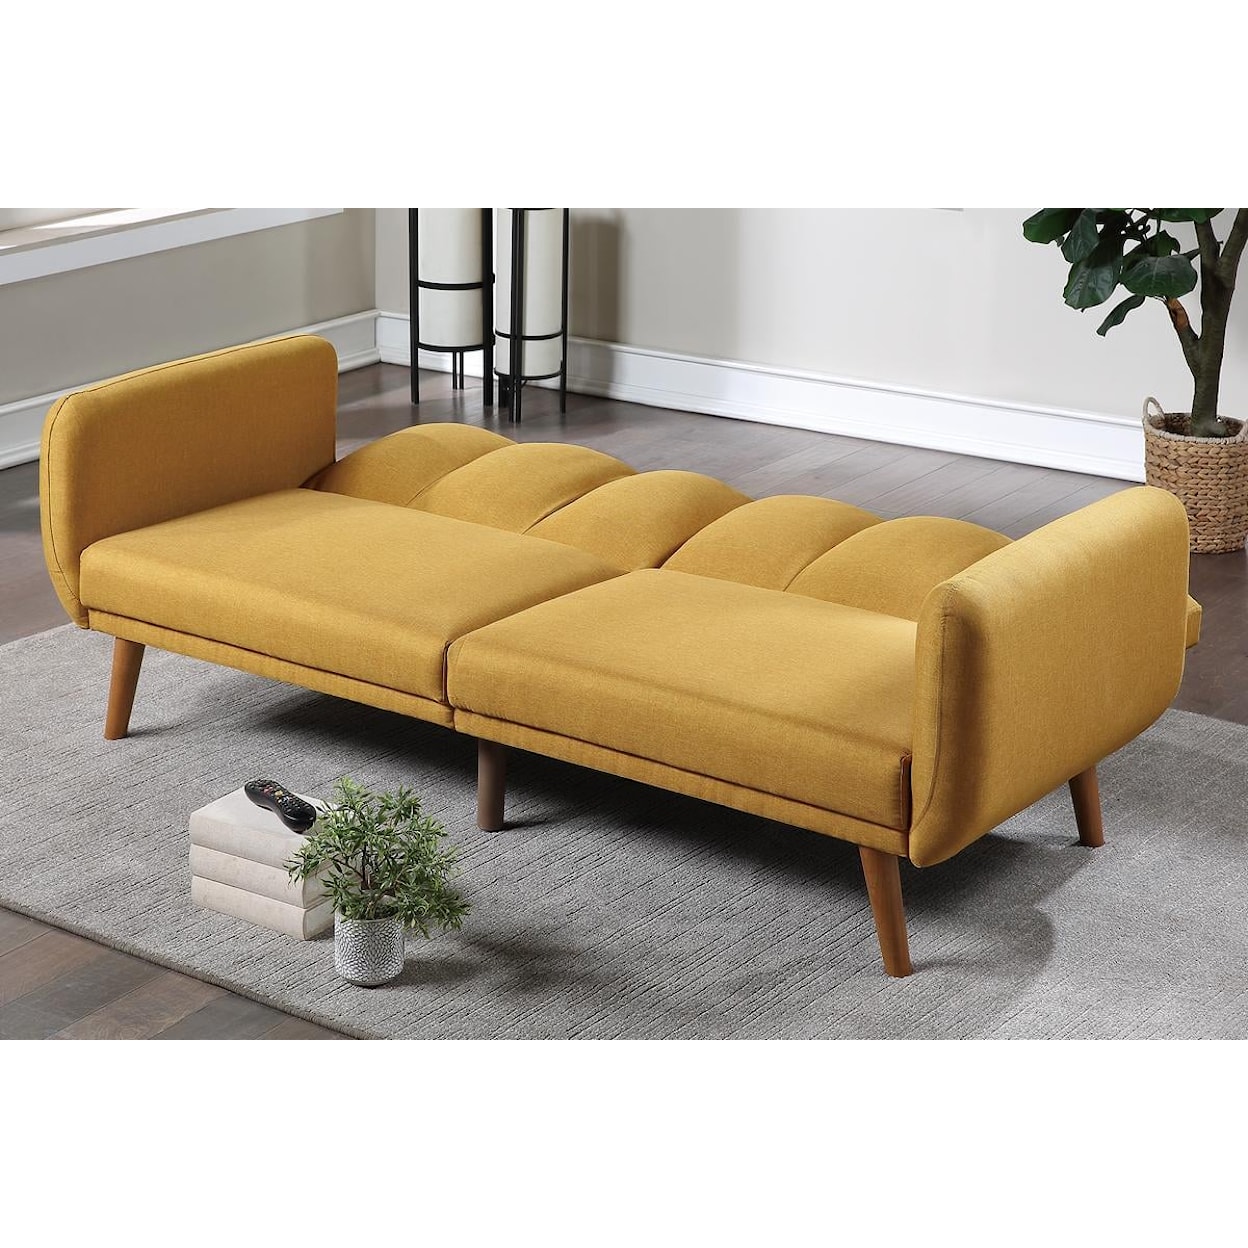 Poundex Sofa Beds PHILLY YELLOW SOFA BED |